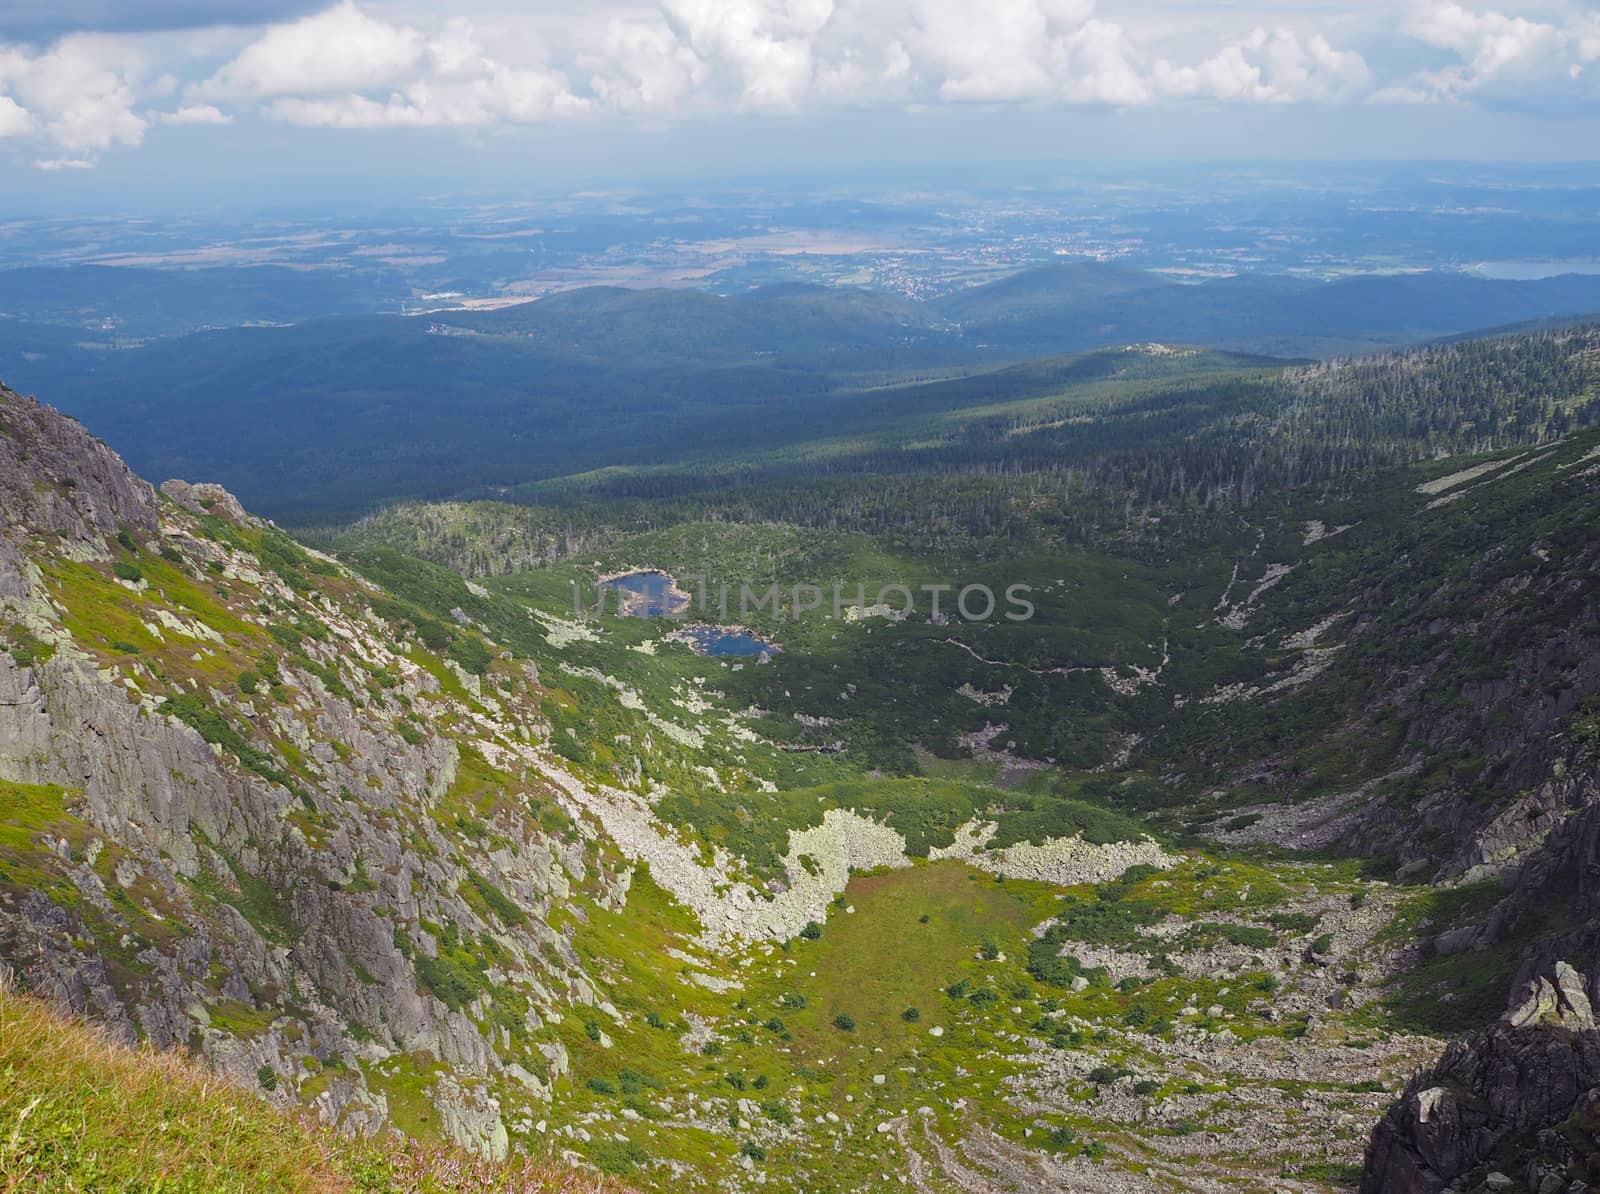 Krkonose mountains scenery with two mountain lakes, green grass and rocks on Czech Poland borders